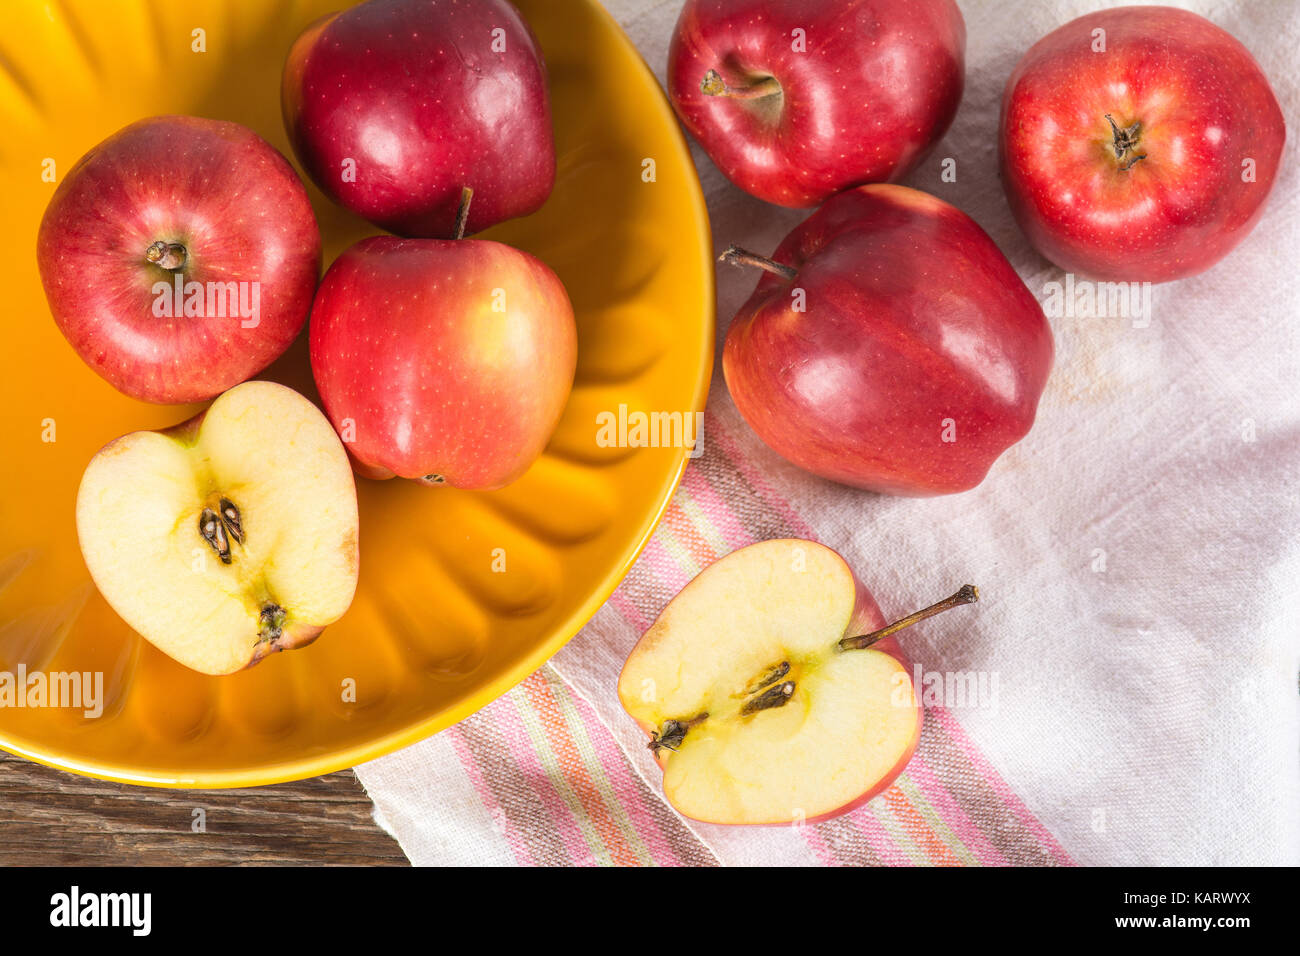 Ripe red apples on plate Stock Photo